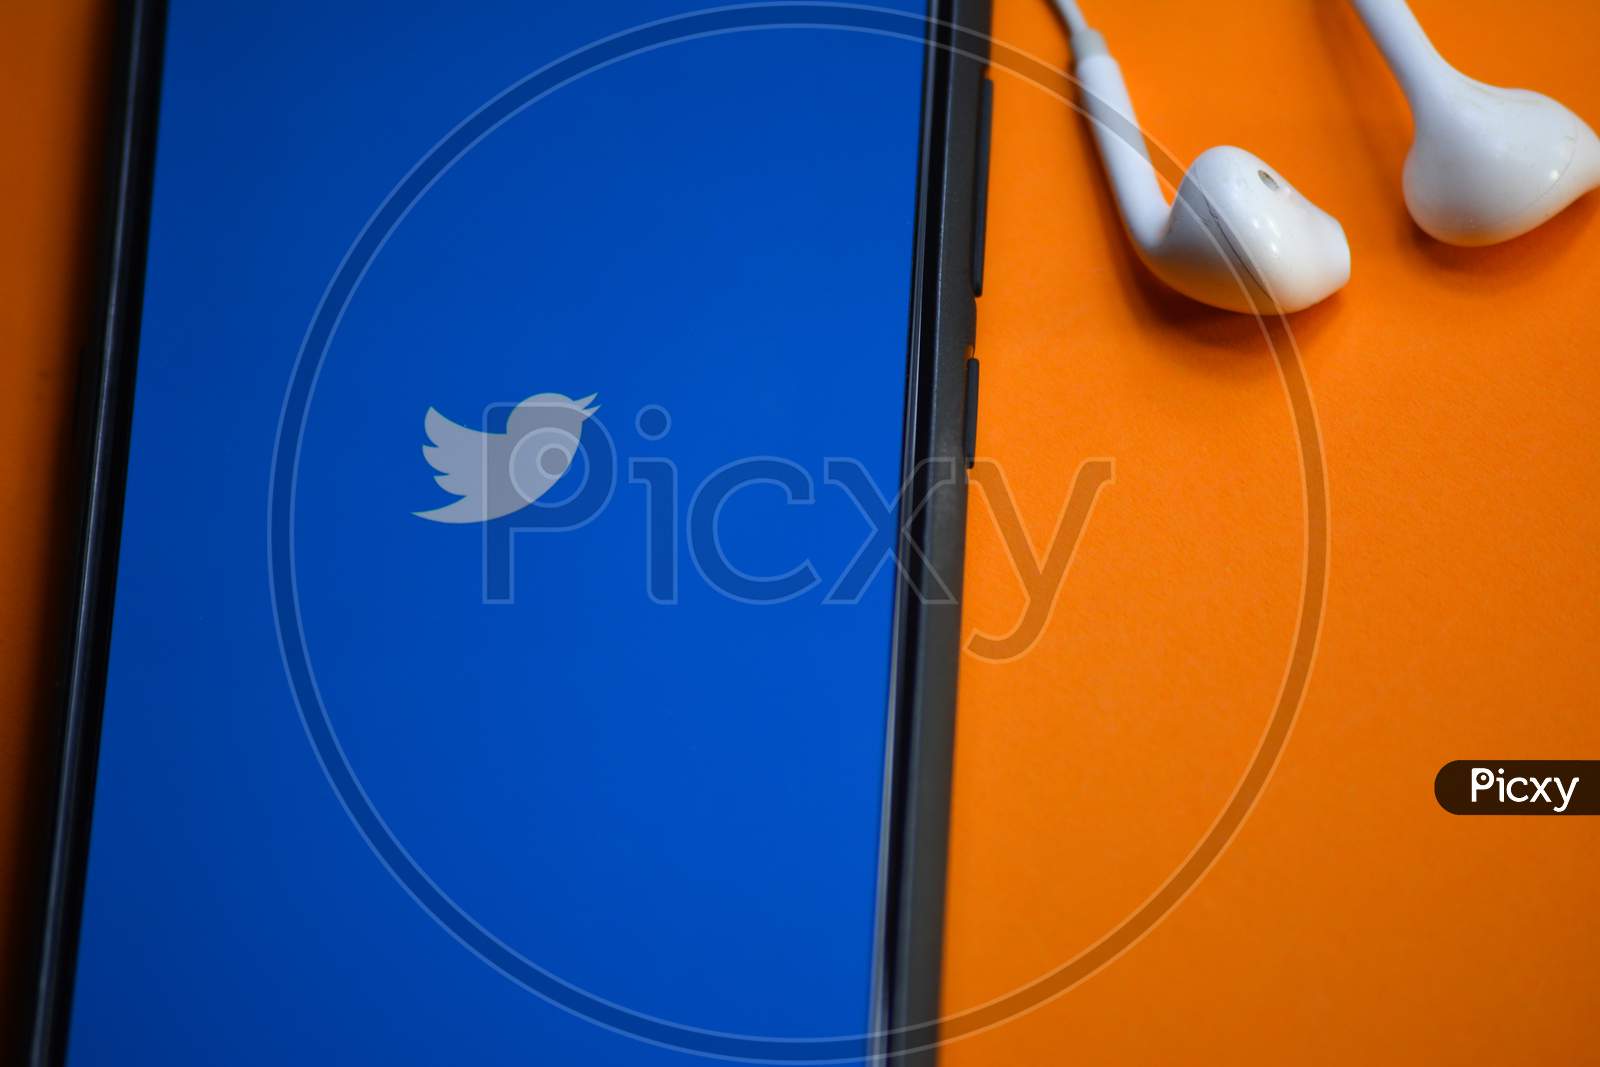 TIKAMGARH, MADHYA PRADESH, INDIA - DECEMBER 17, 2019: Twitter logo on smartphone screen and earphones. Twitter is a social media online service for microblogging and networking communication.